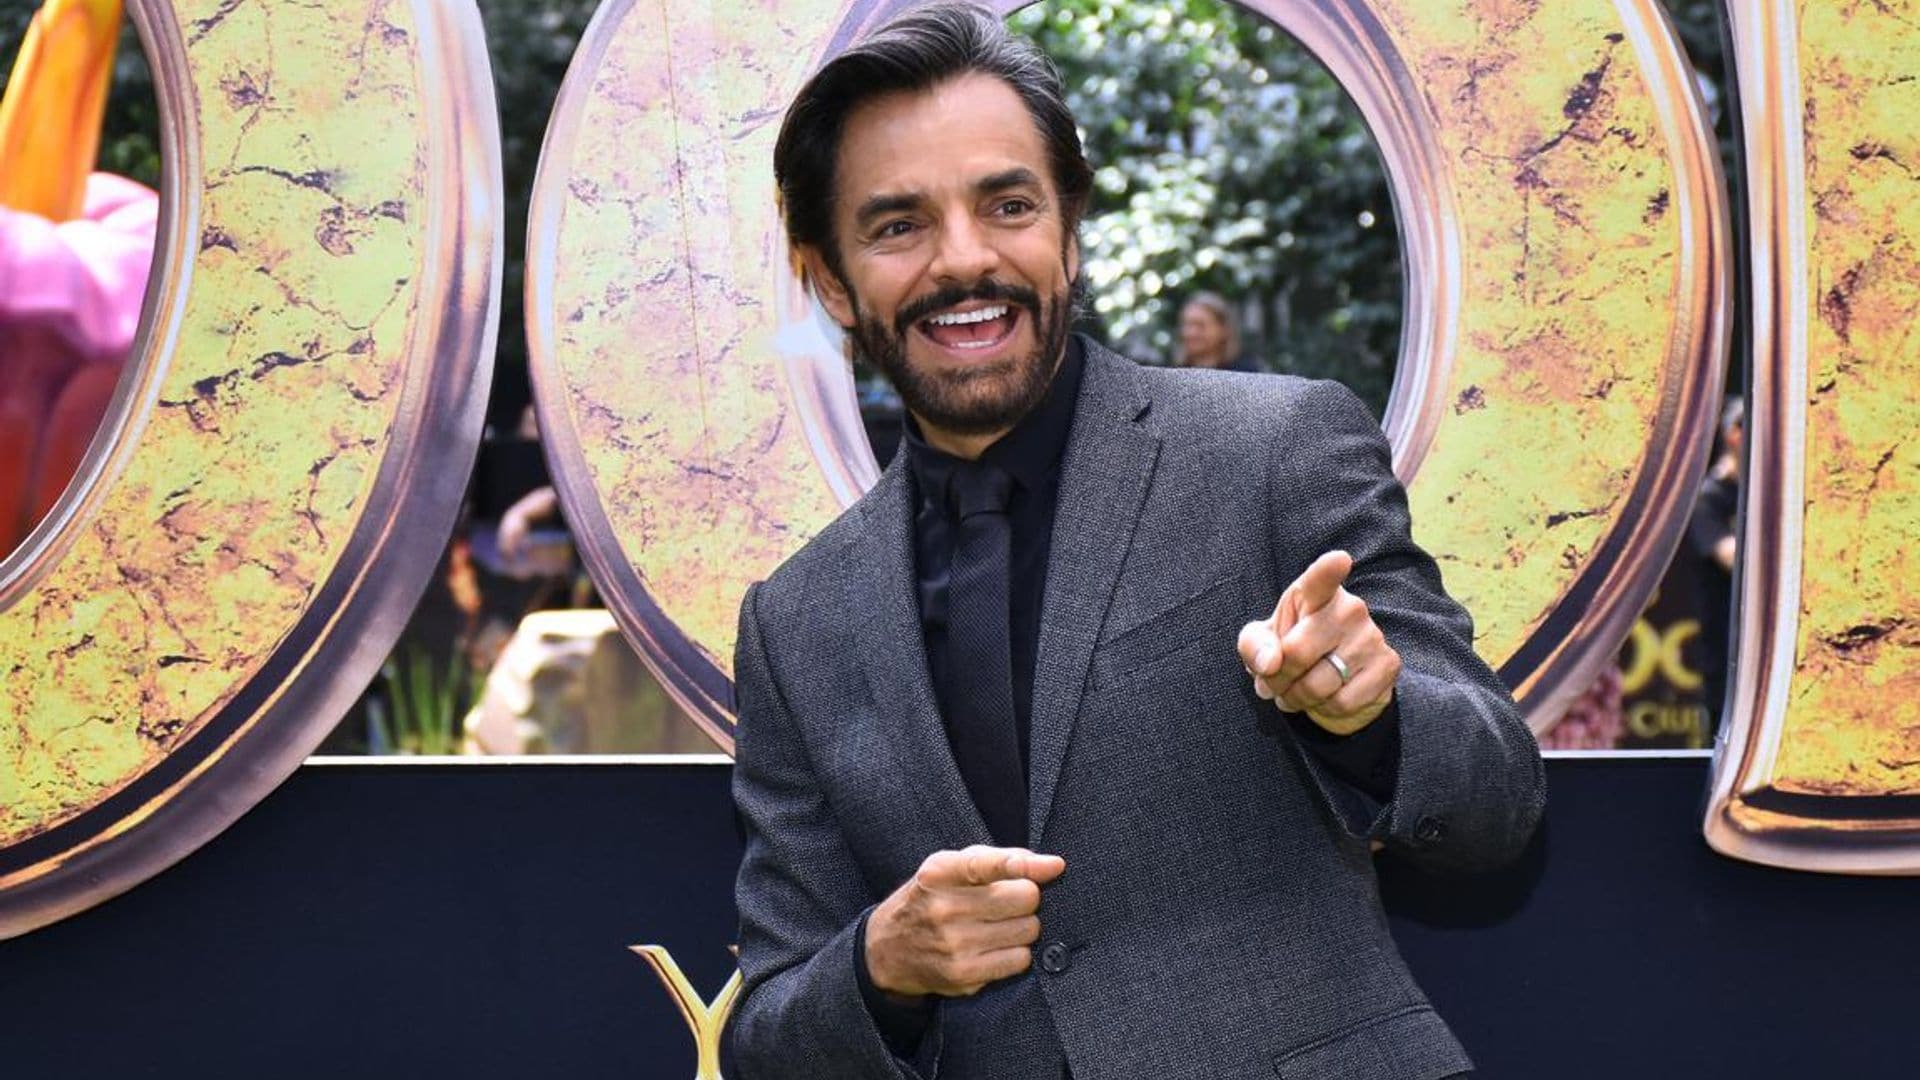 Eugenio Derbez talks to us about his new project, his family and his daughter Aislinn’s separation